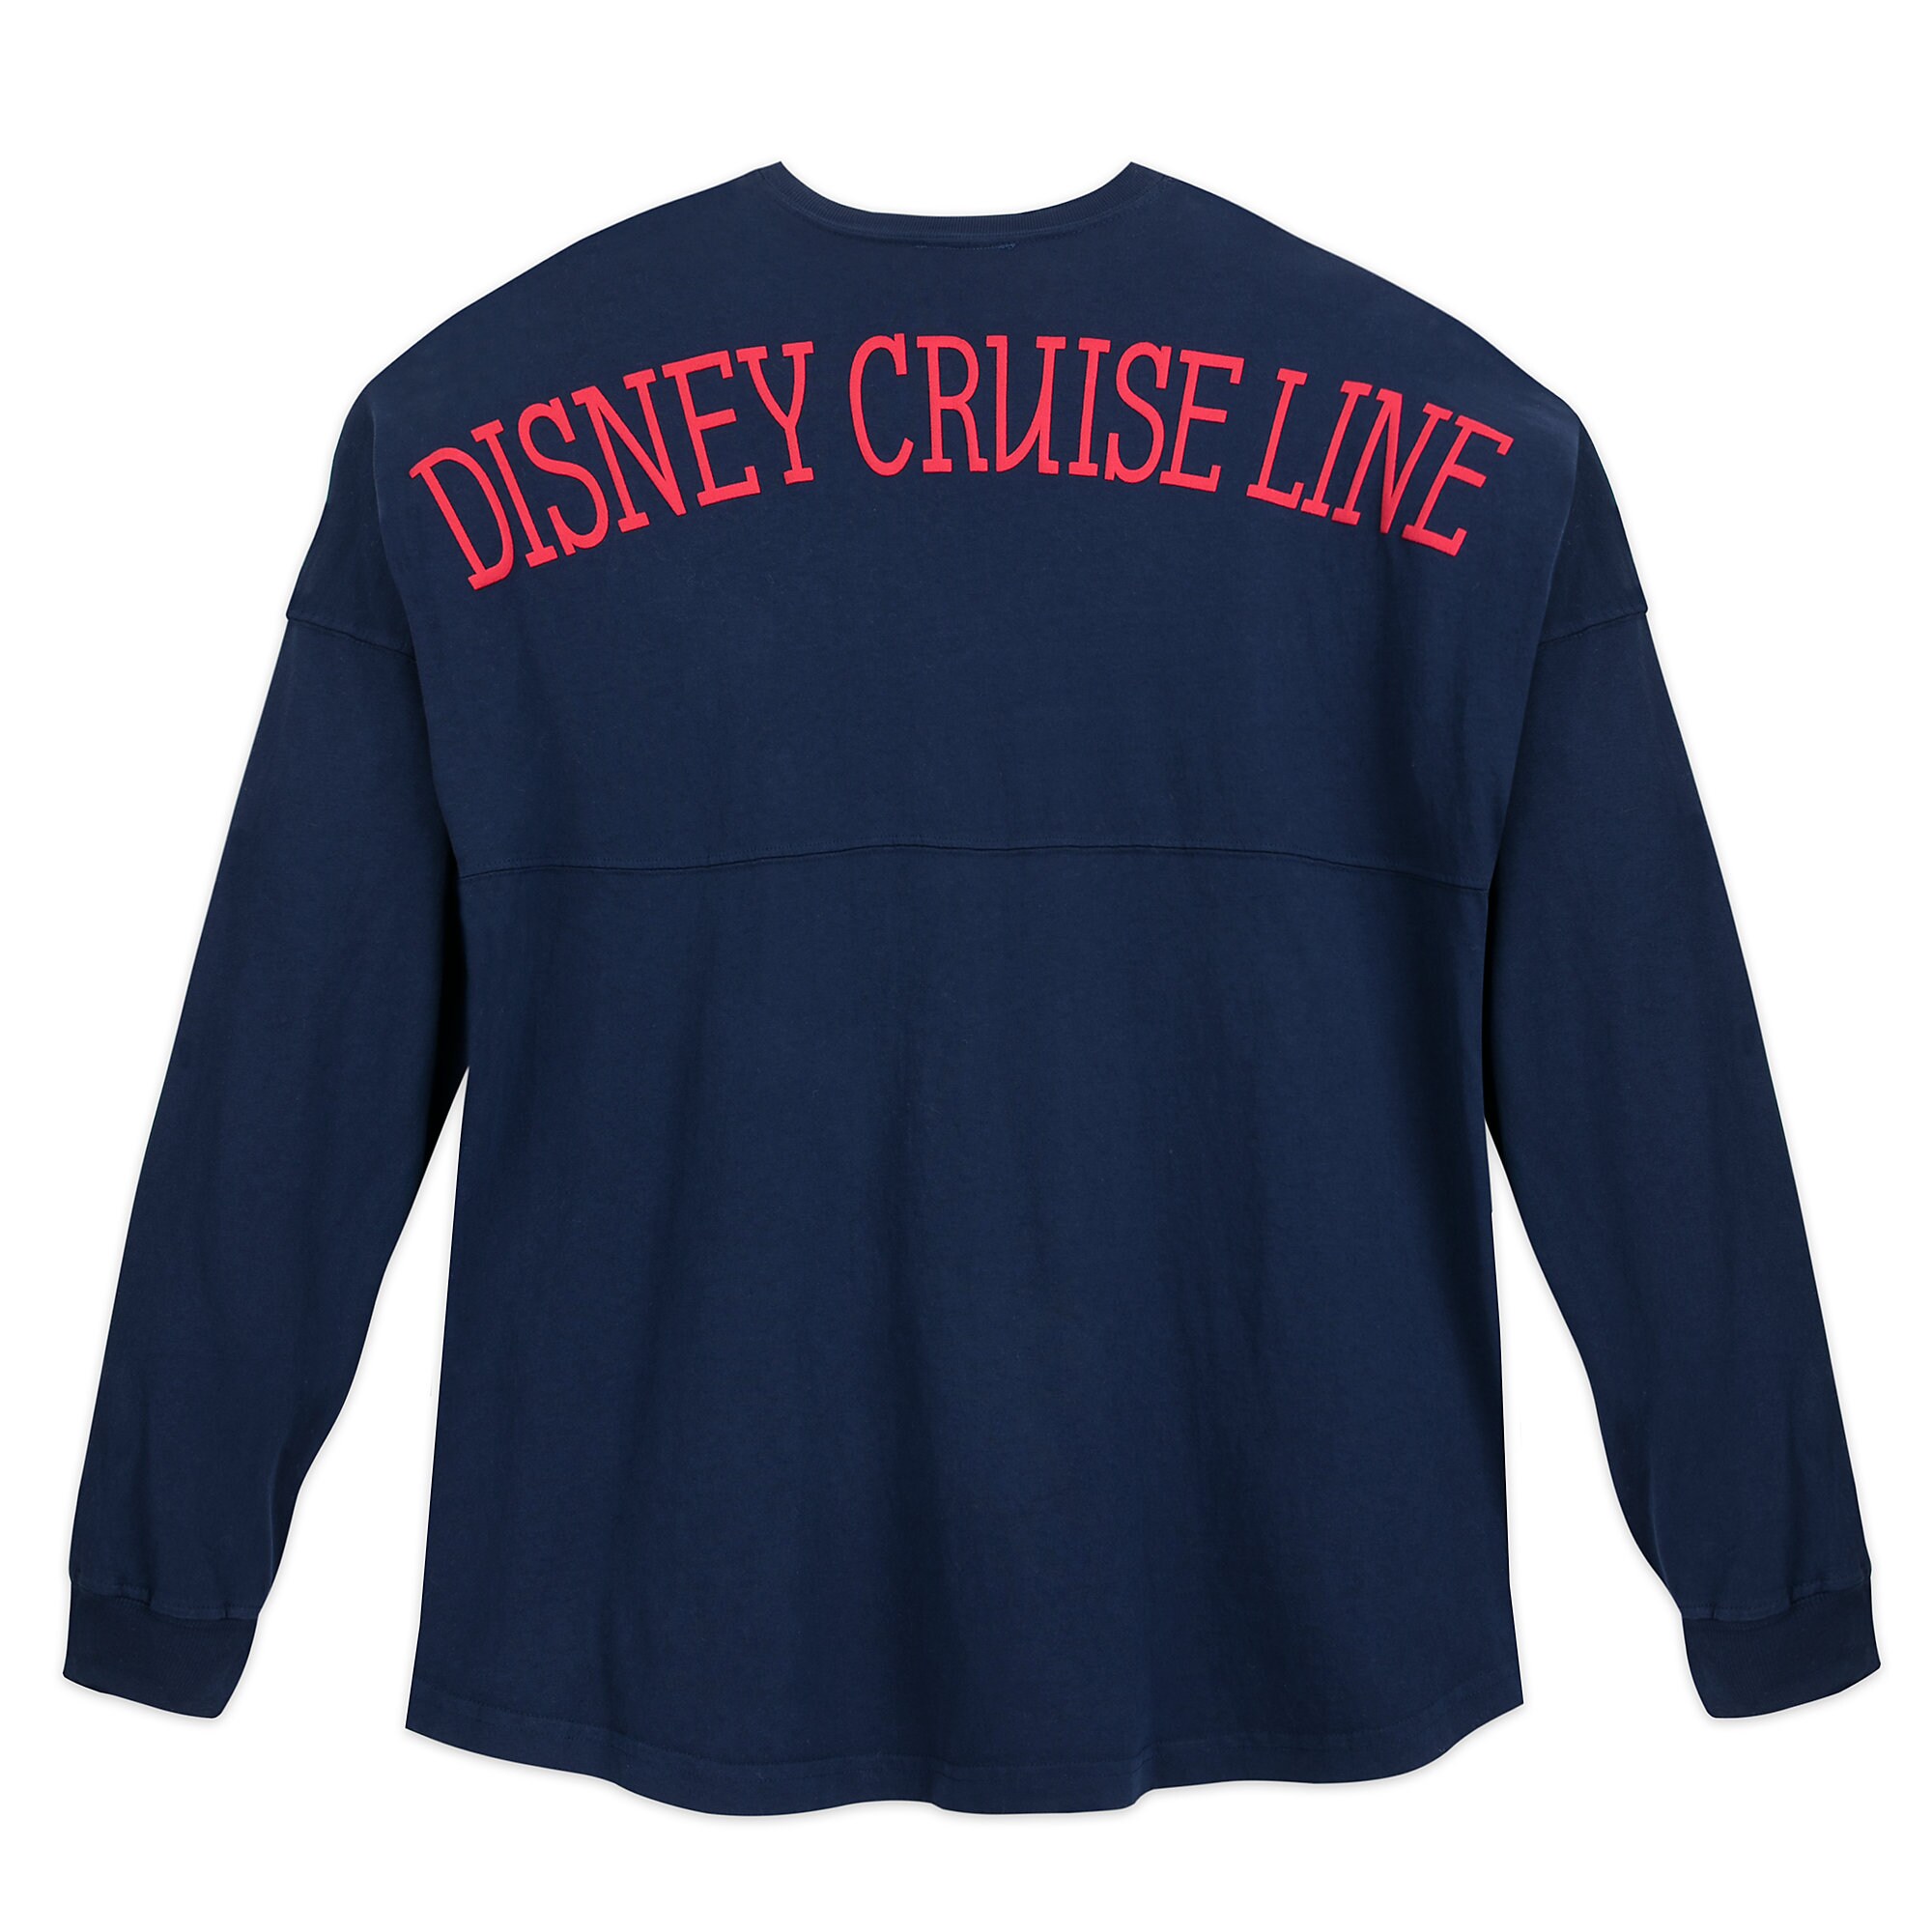 Disney Cruise Line Lace-Up Spirit Jersey for Adults - Navy